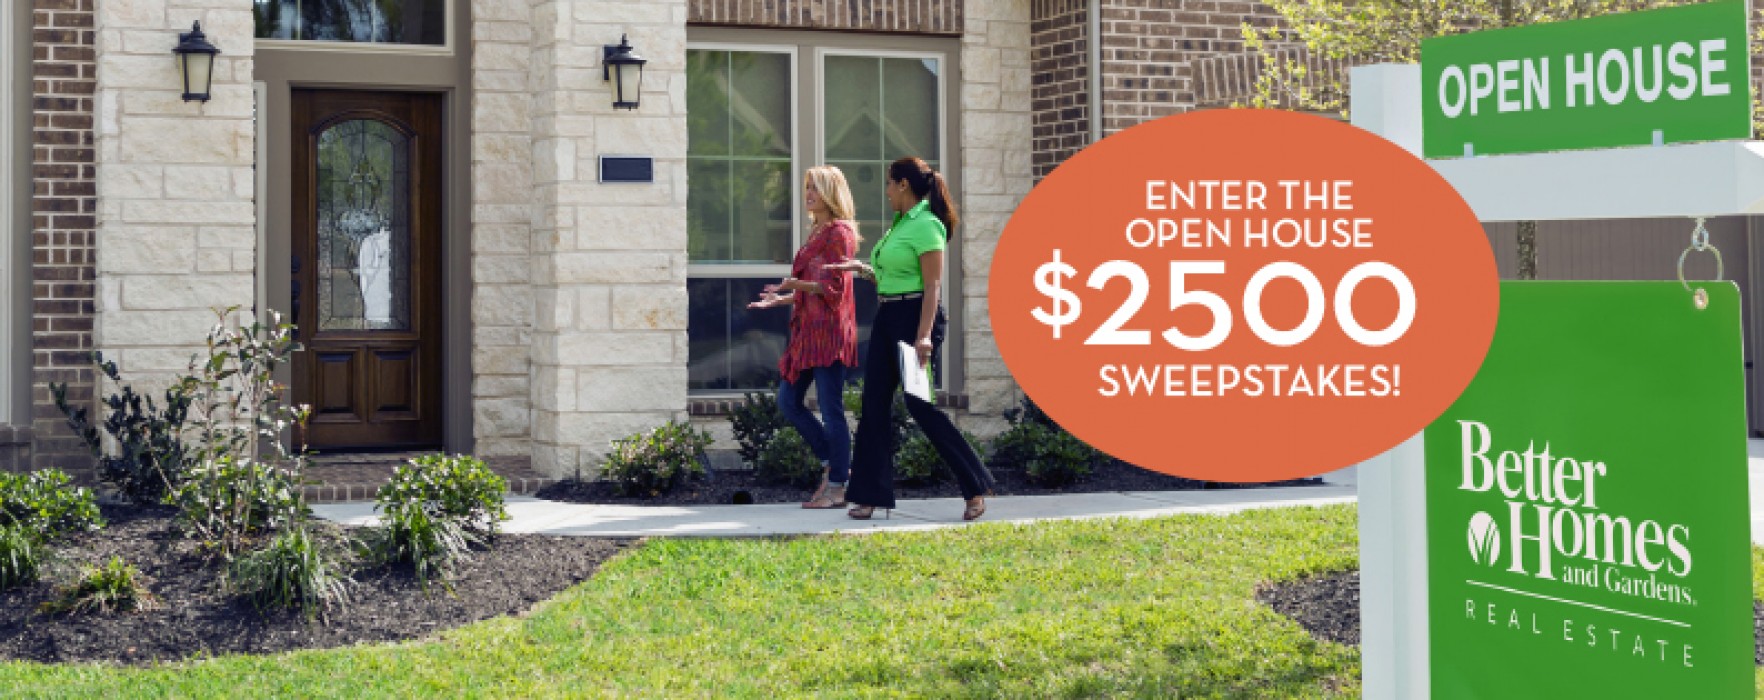 BHGRE Open House Sweepstakes 2015